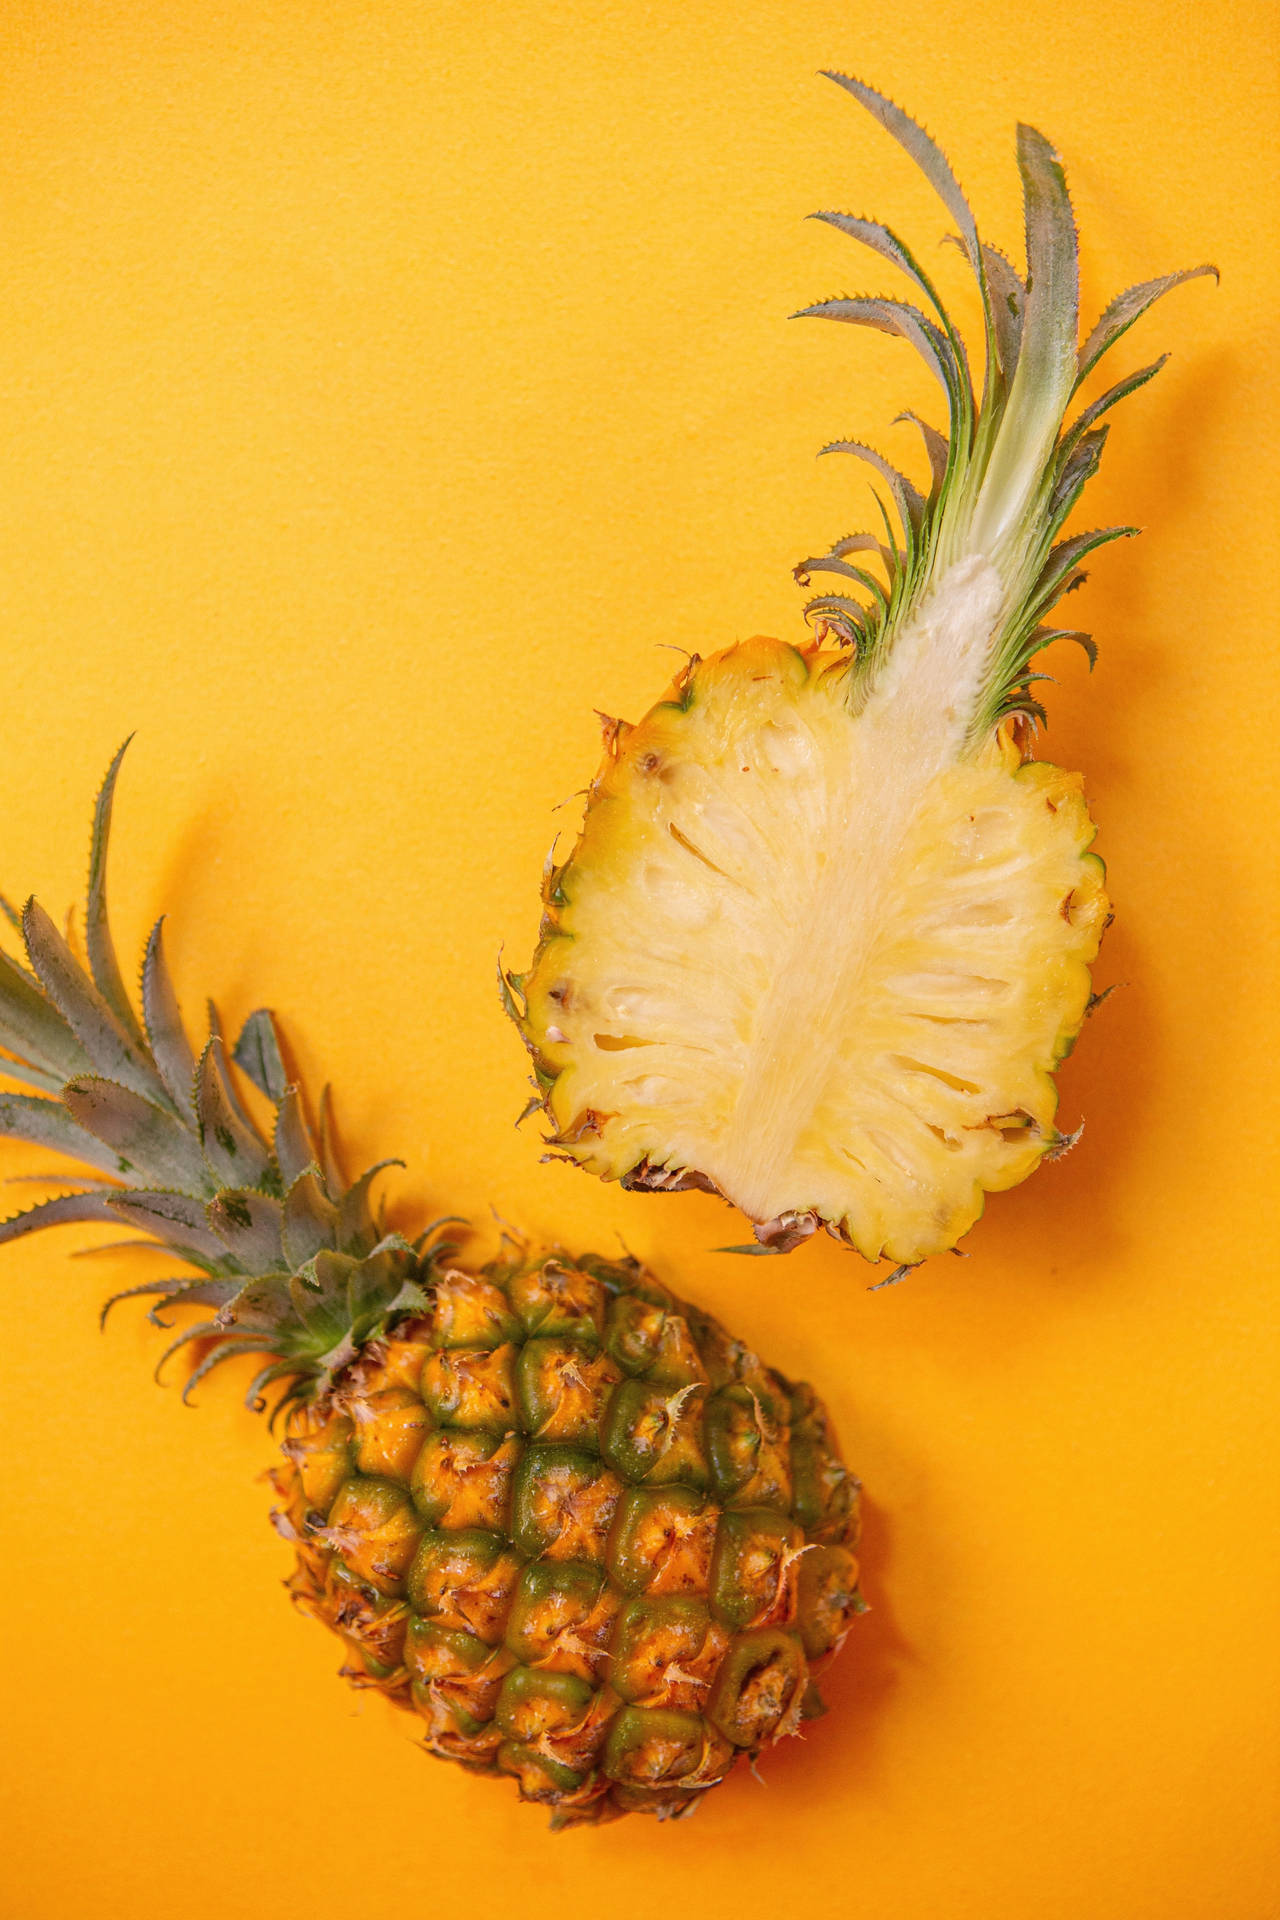 Vibrant iPhone Wallpaper Showcasing a Single Pineapple on a Yellow Background Wallpaper